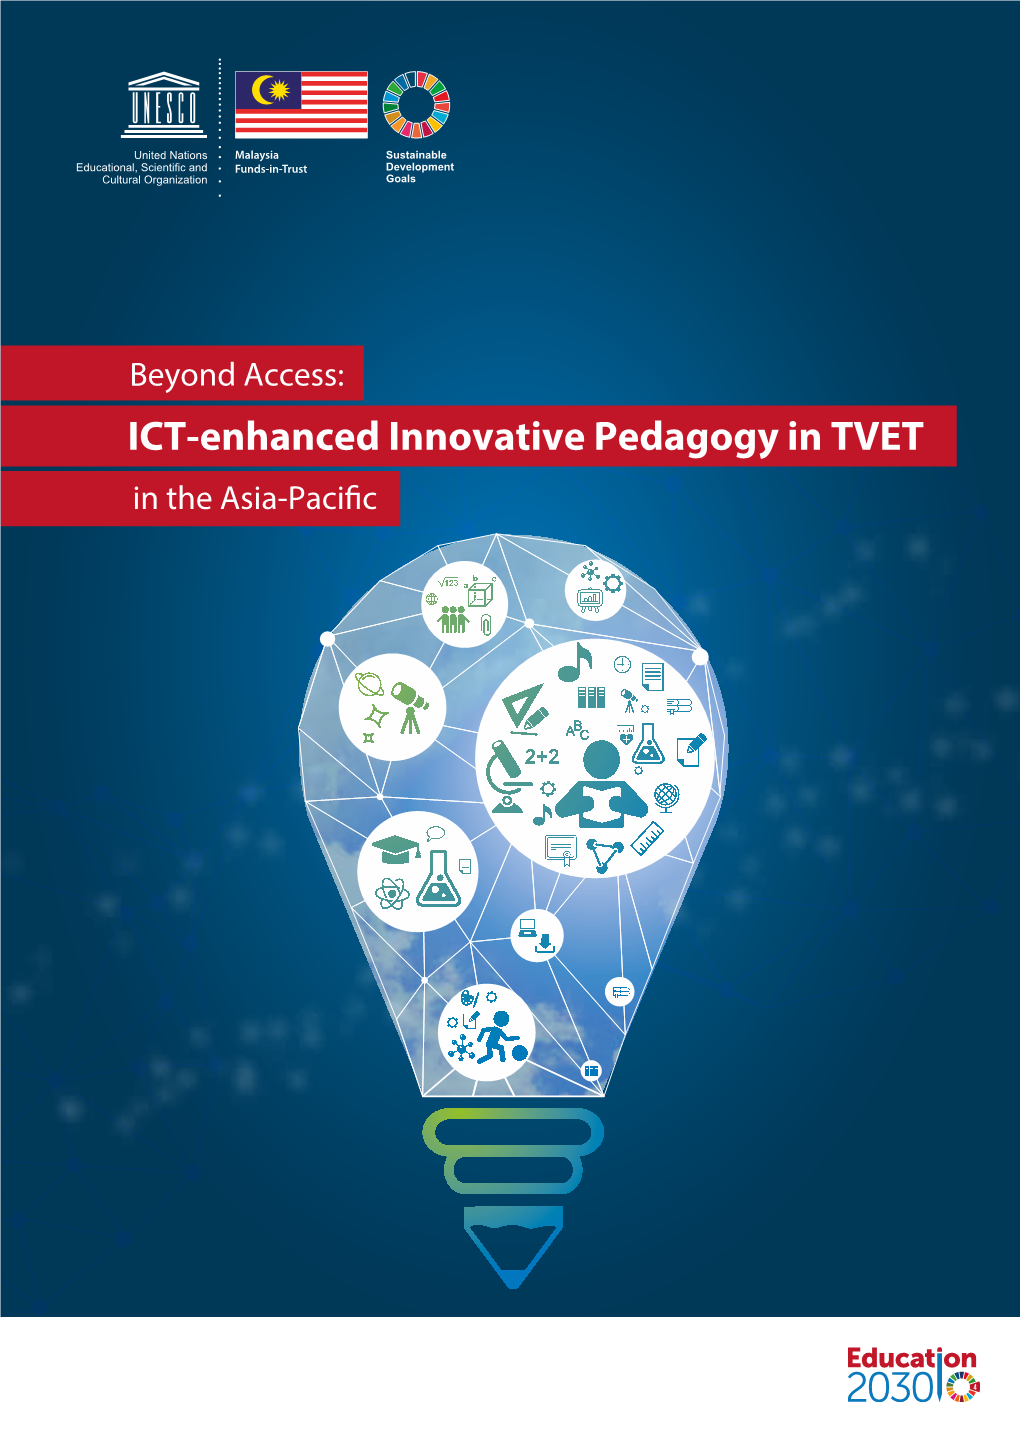 ICT-Enhanced Innovative Pedagogy in TVET in the Asia-Pacific